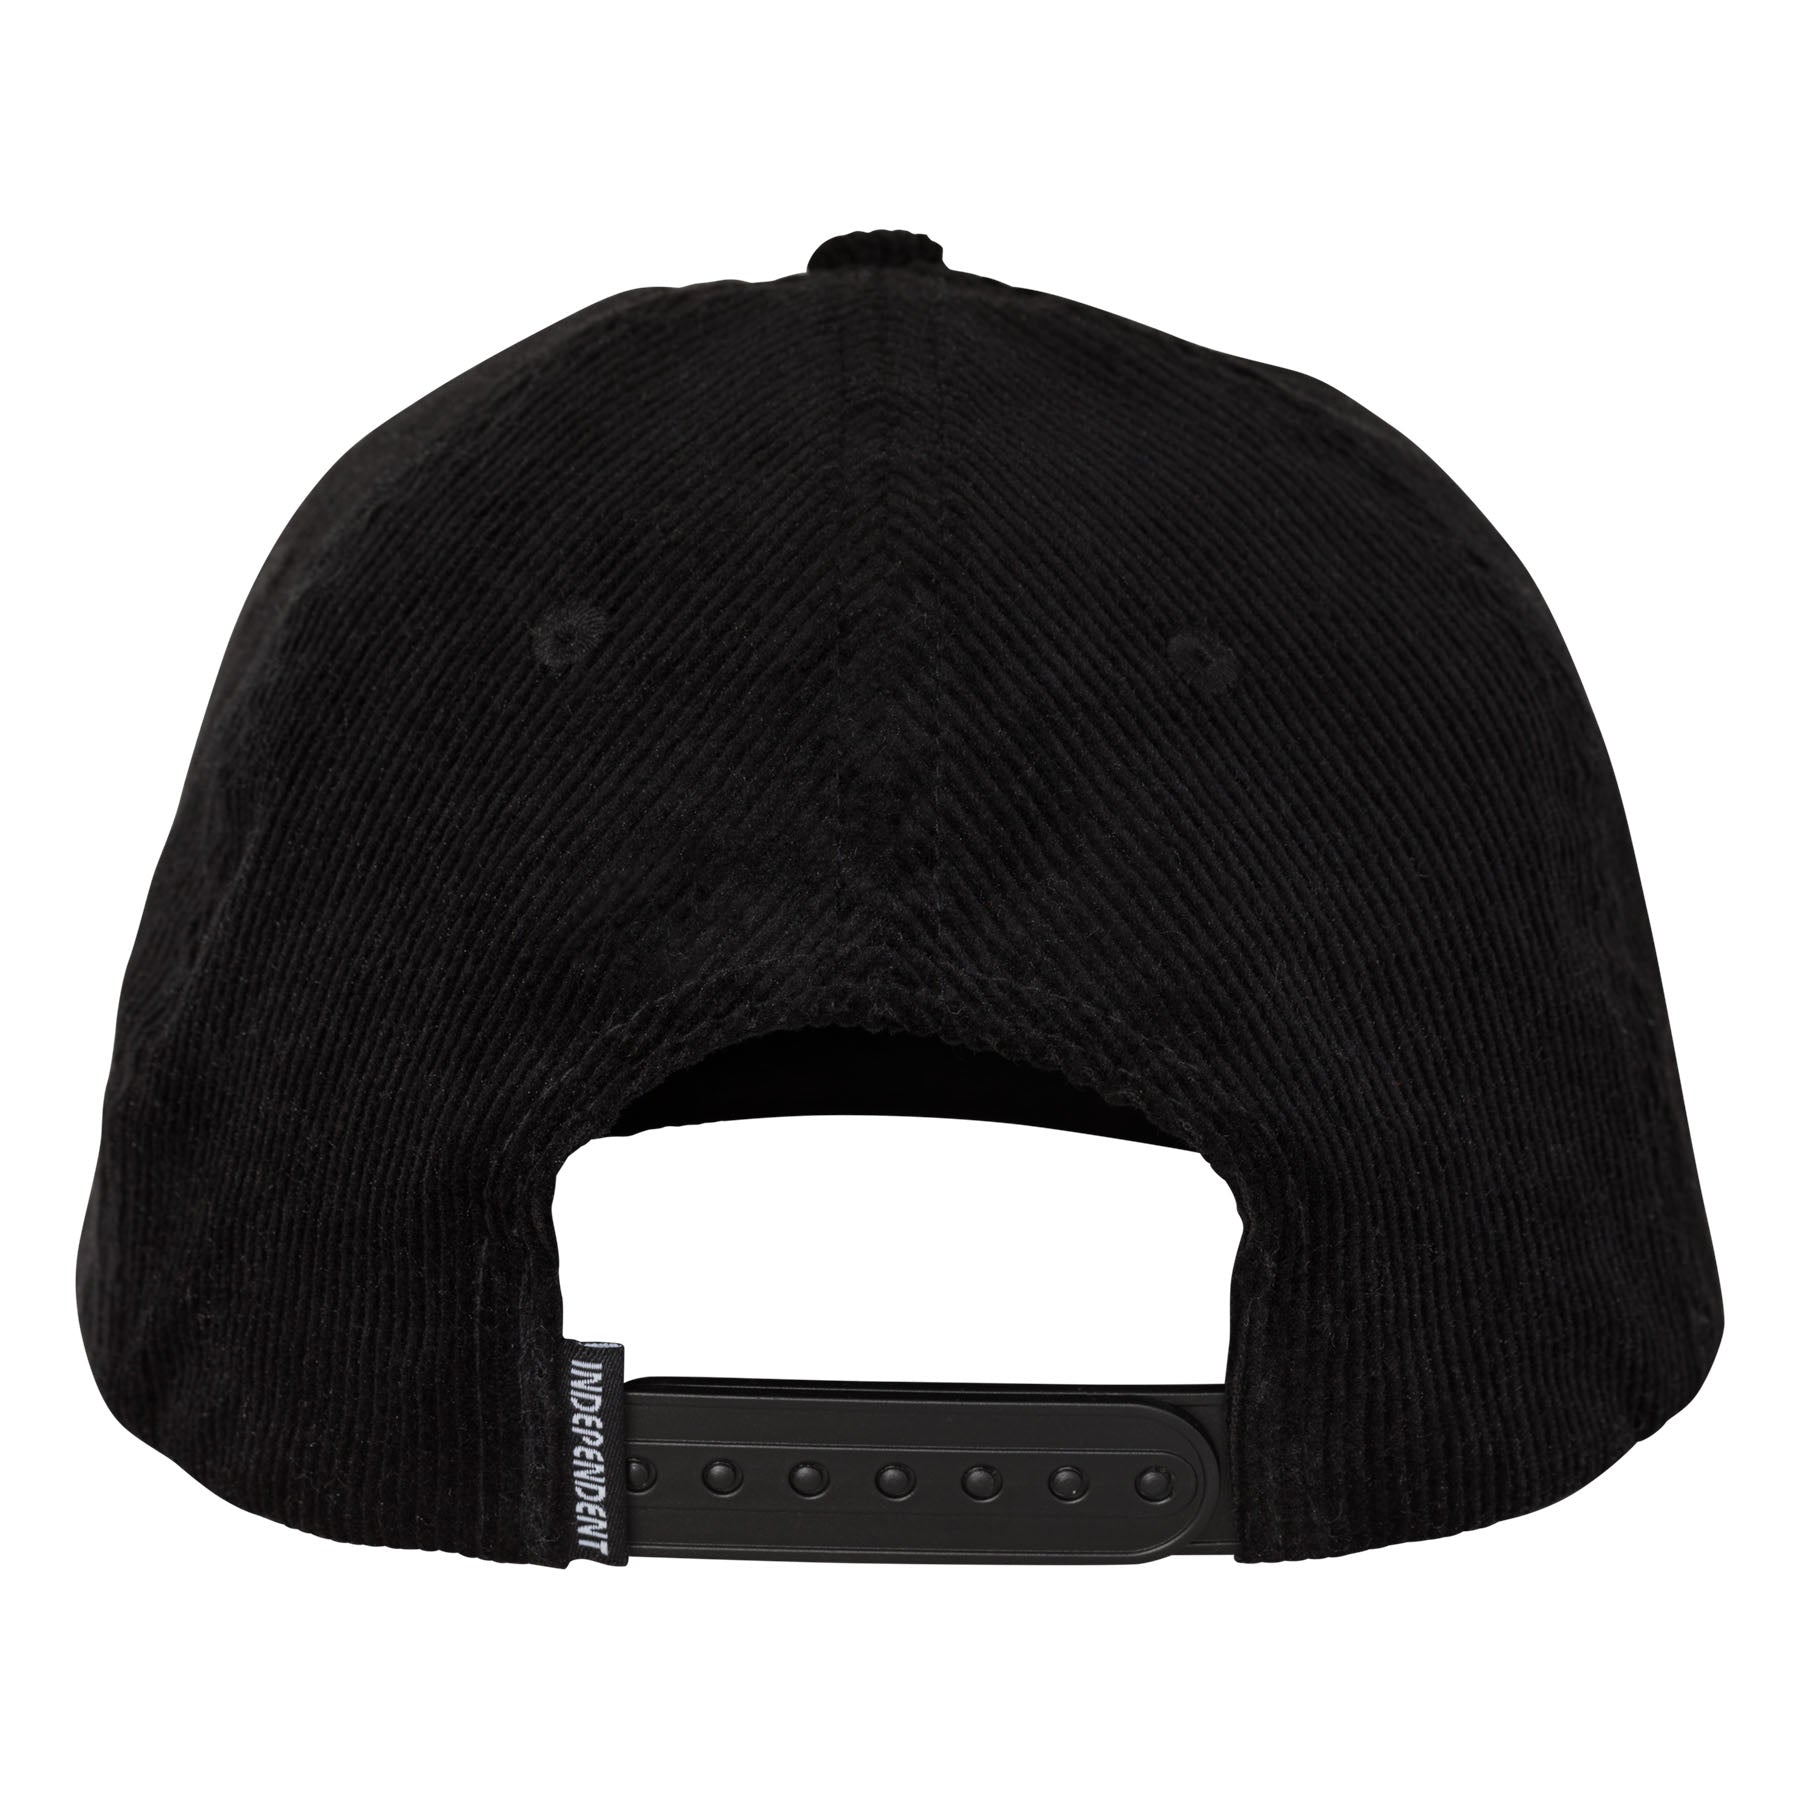 Independent Beacon Snapback Unstructured Mid Hat Black OS Unisex - Invisible Board Shop